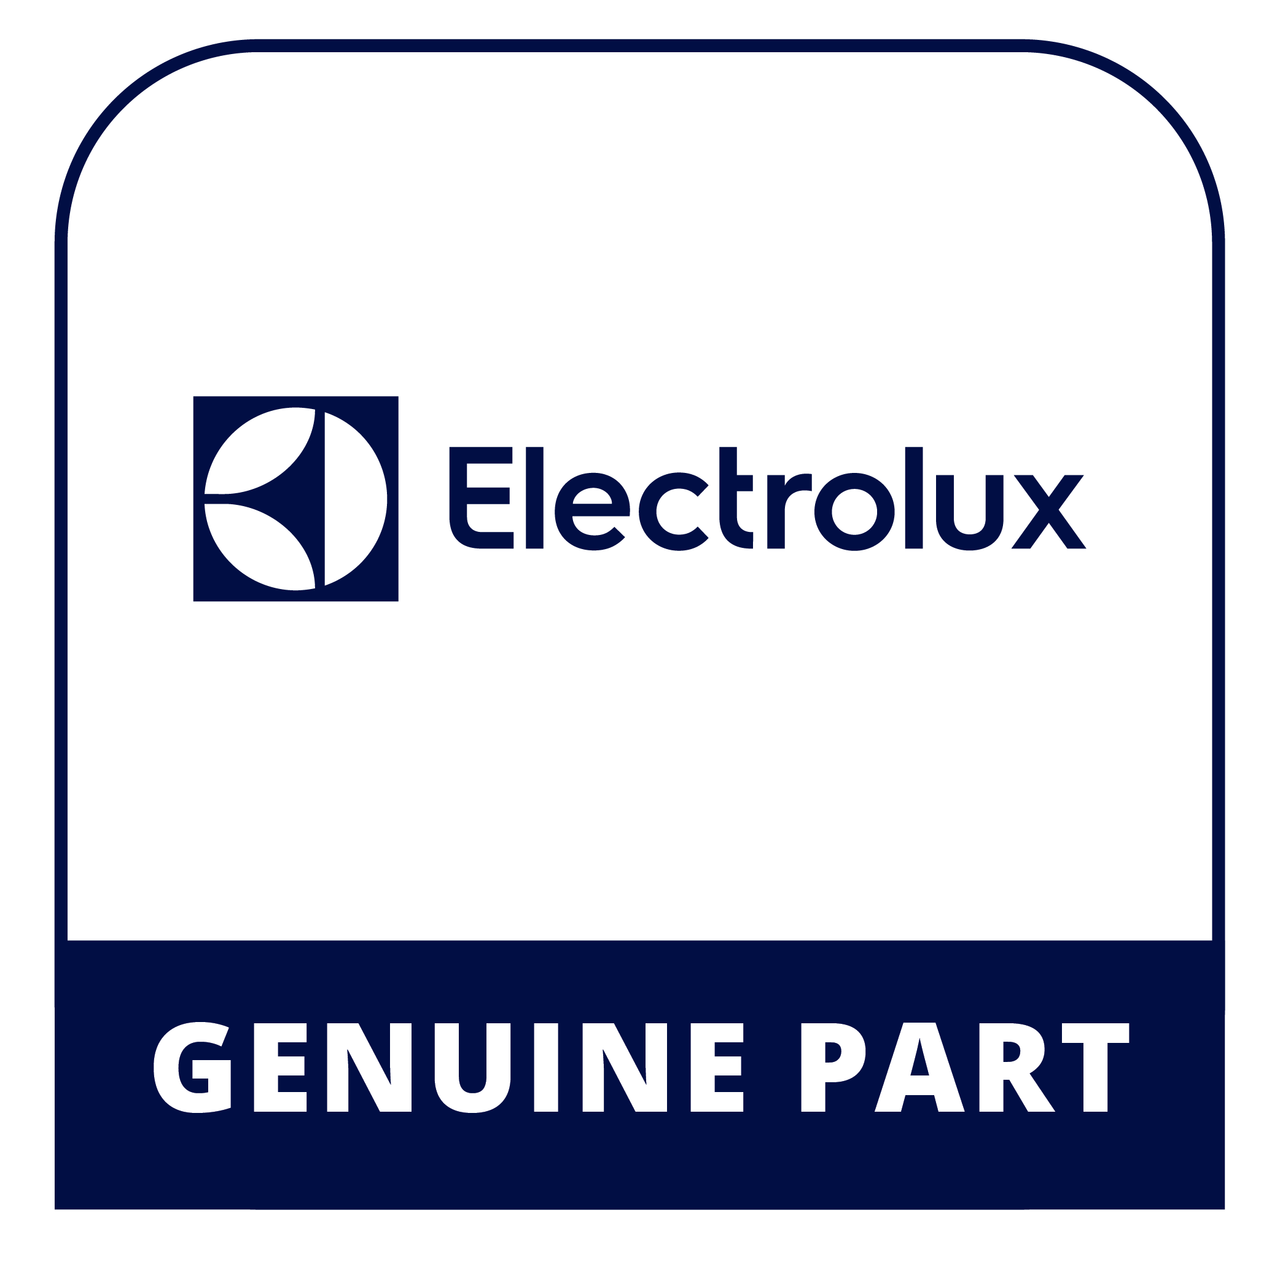 Frigidaire - Electrolux 318205822 Owners Manual - Genuine Electrolux Part